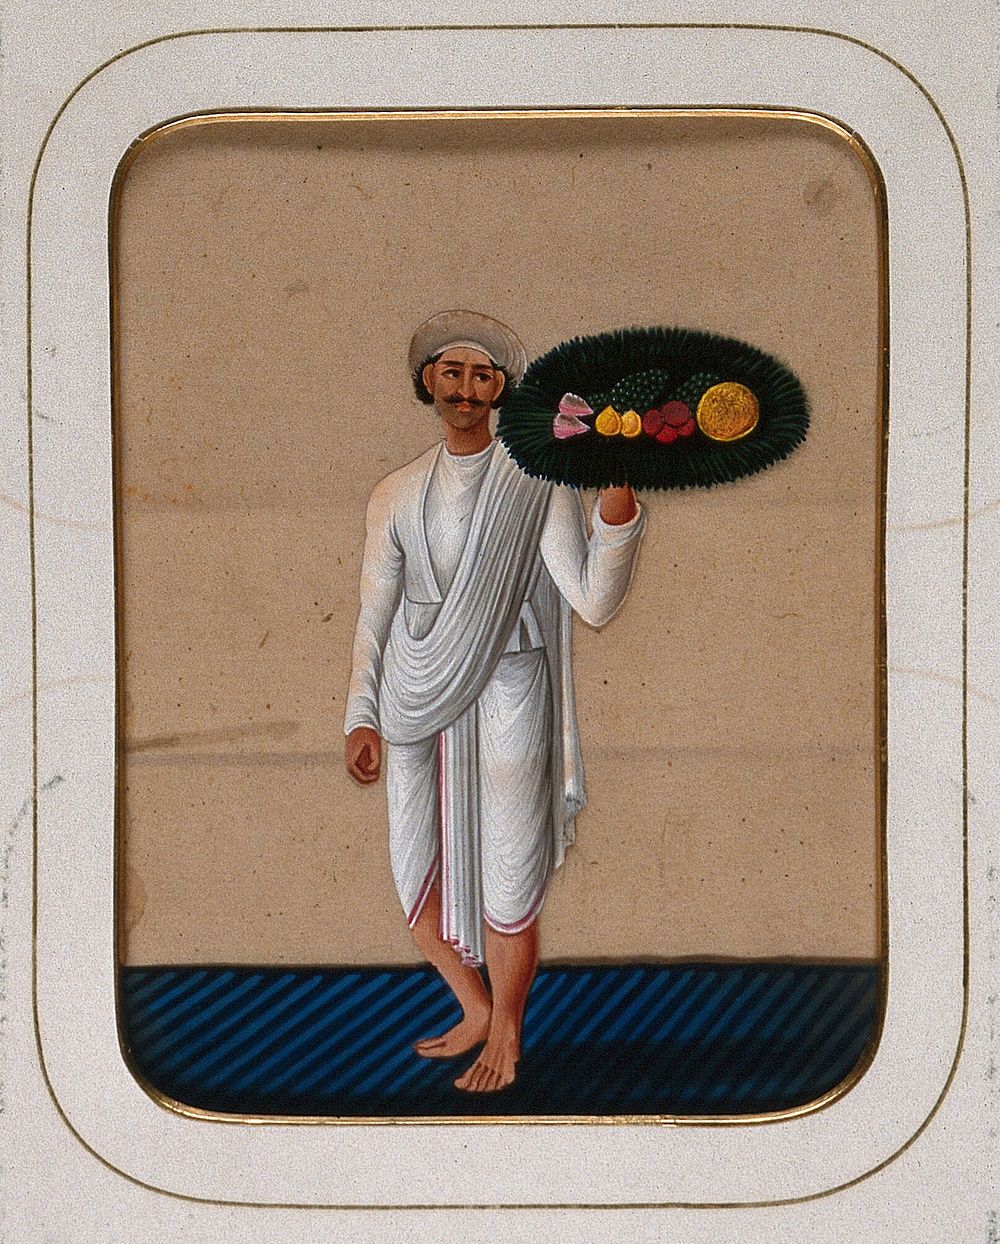 A servant holding up a platter of fruit. Gouache painting on mica by an Indian artist.